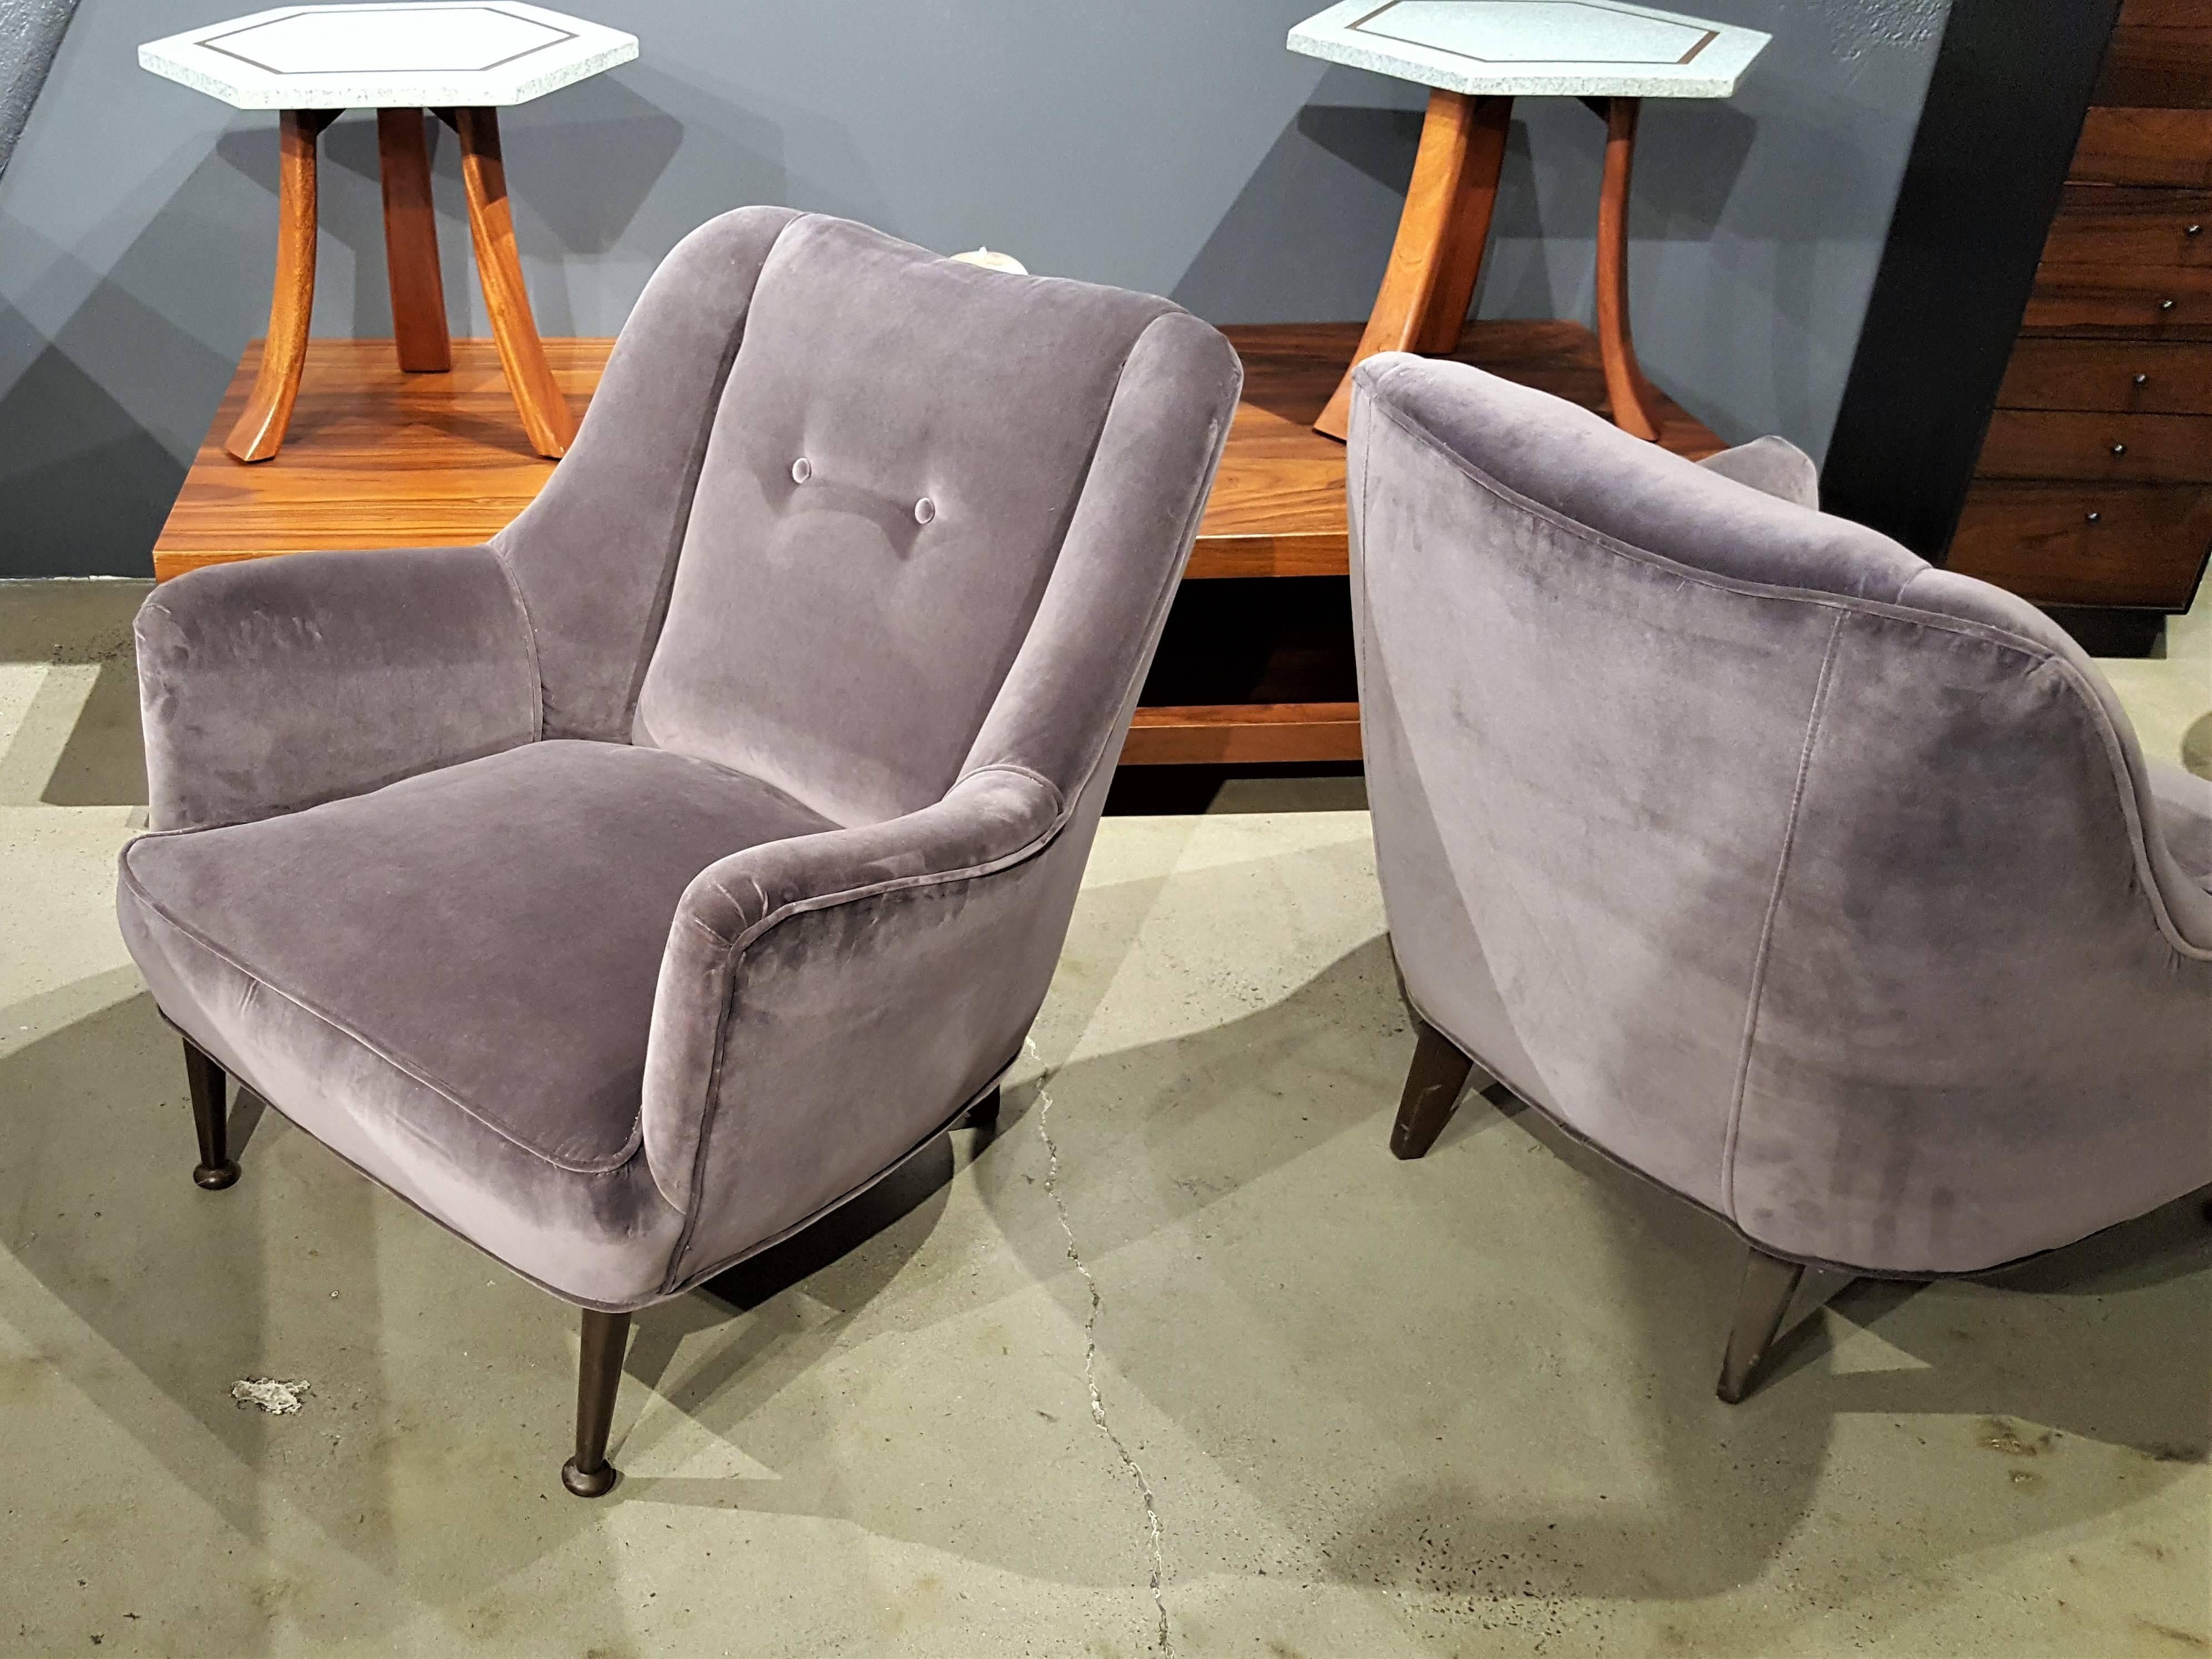 Cotton Luxe Pair of Mid-Century Modern Lounge Chairs in Deep Lilac Gray Velvet